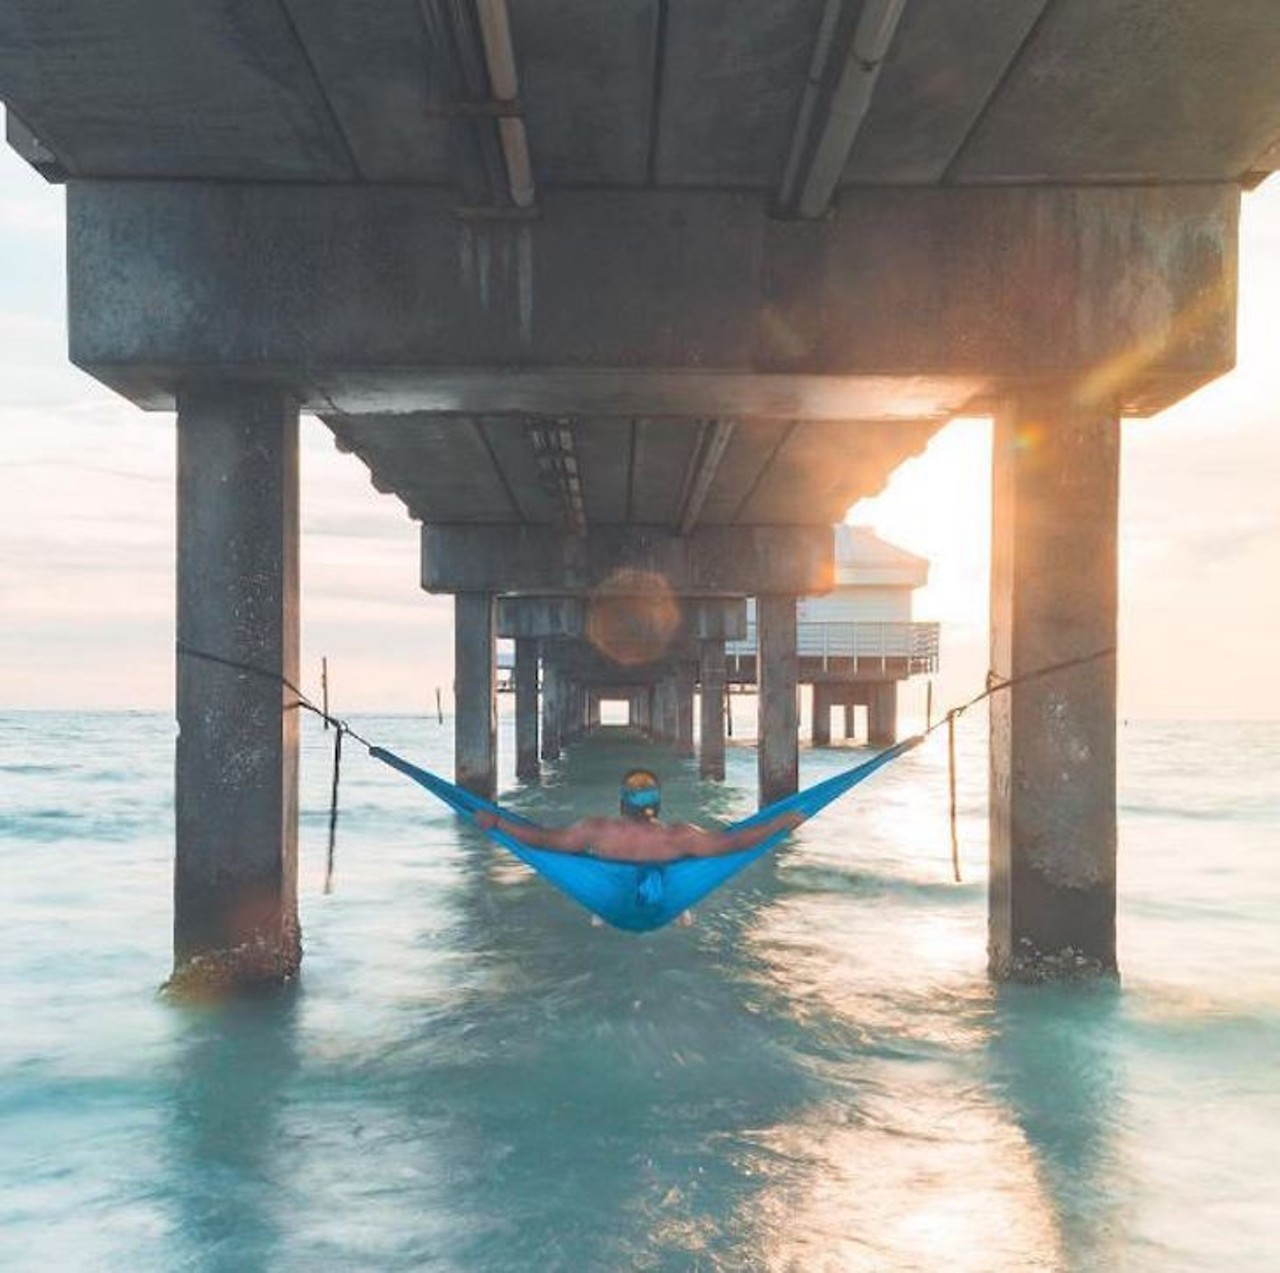 Clearwater
Driving distance from Orlando: 2 hours 15 minutes 
If crystal clear waters and sugar white sand are your thing, take advantage of Clearwater. There is aquatic fun on the beach and off. The Clearwater Marine Aquarium is the home of Winter, the bottlenose dolphin featured in the movie Dolphin Tale. 
Photo via visitflorida/Instagram